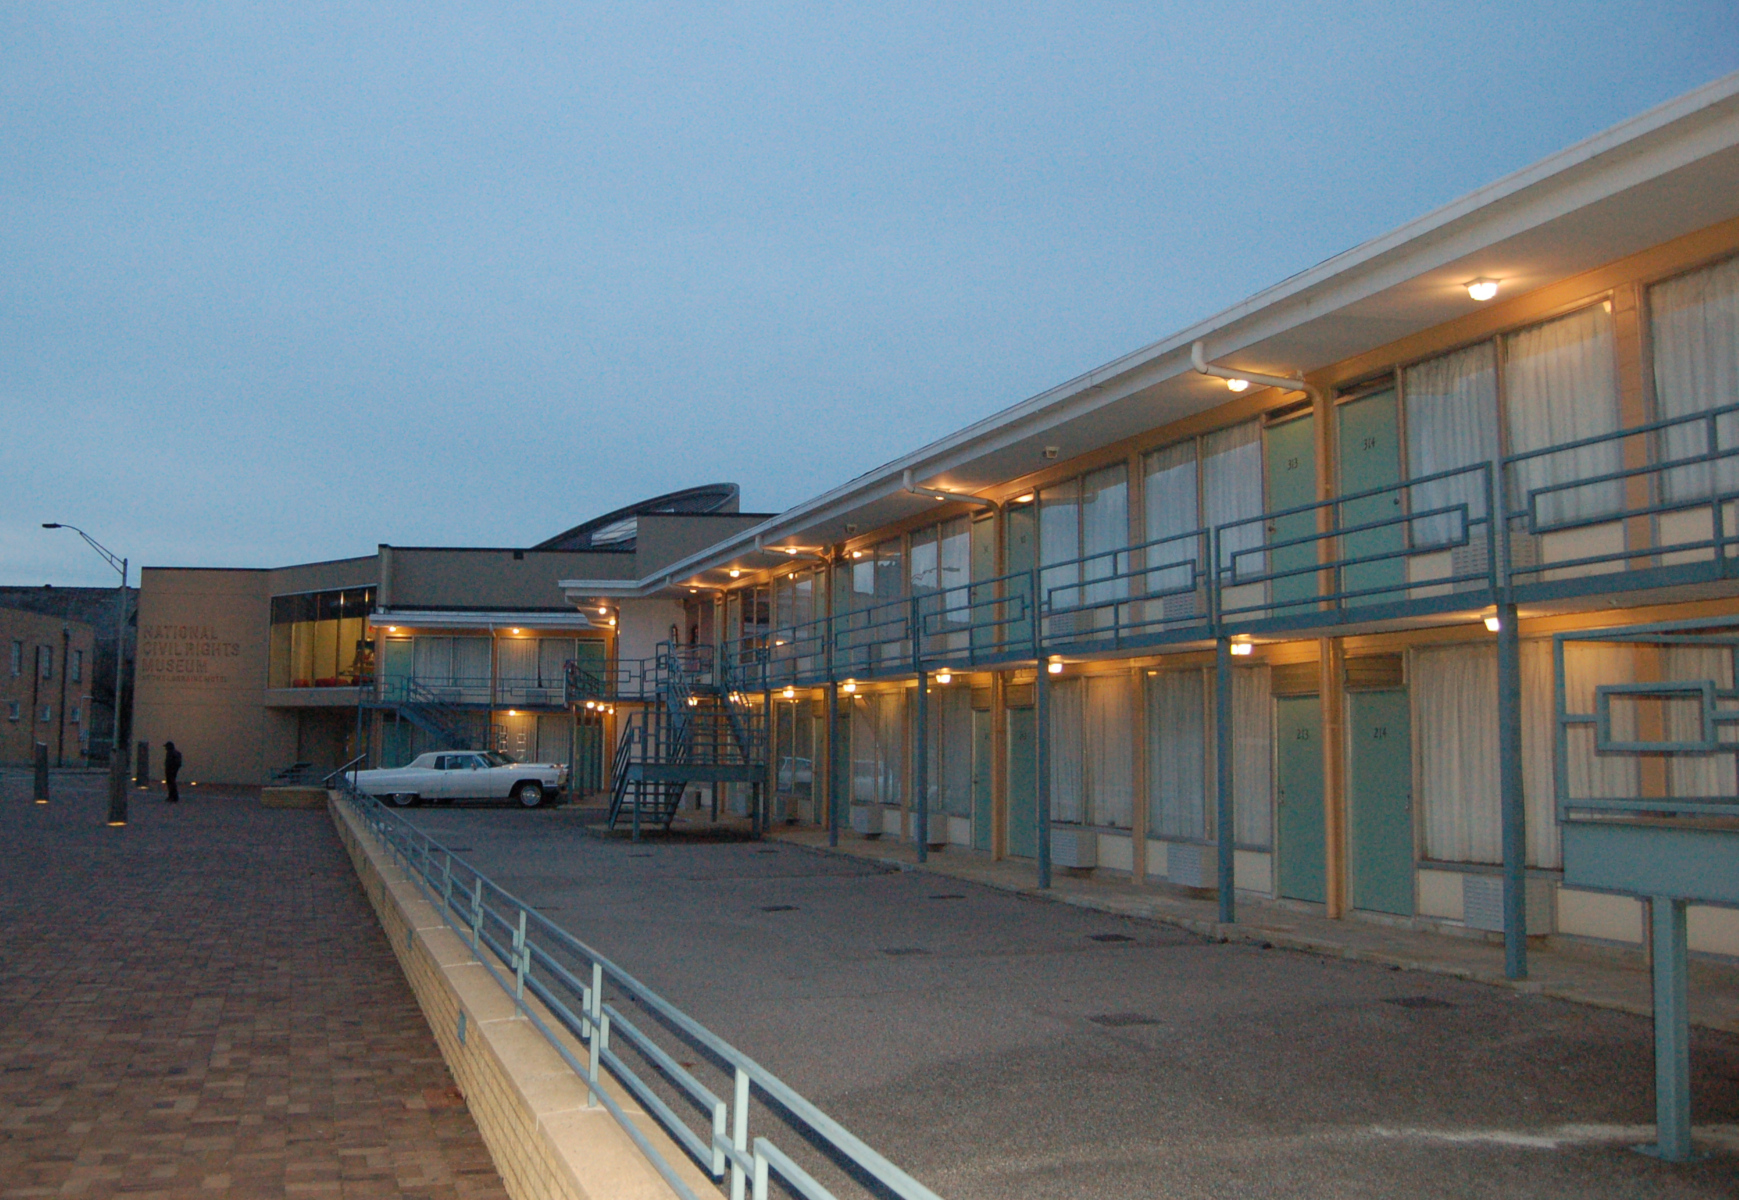 The Lorraine Motel, as incorporated into the National Civil Rights Museum.